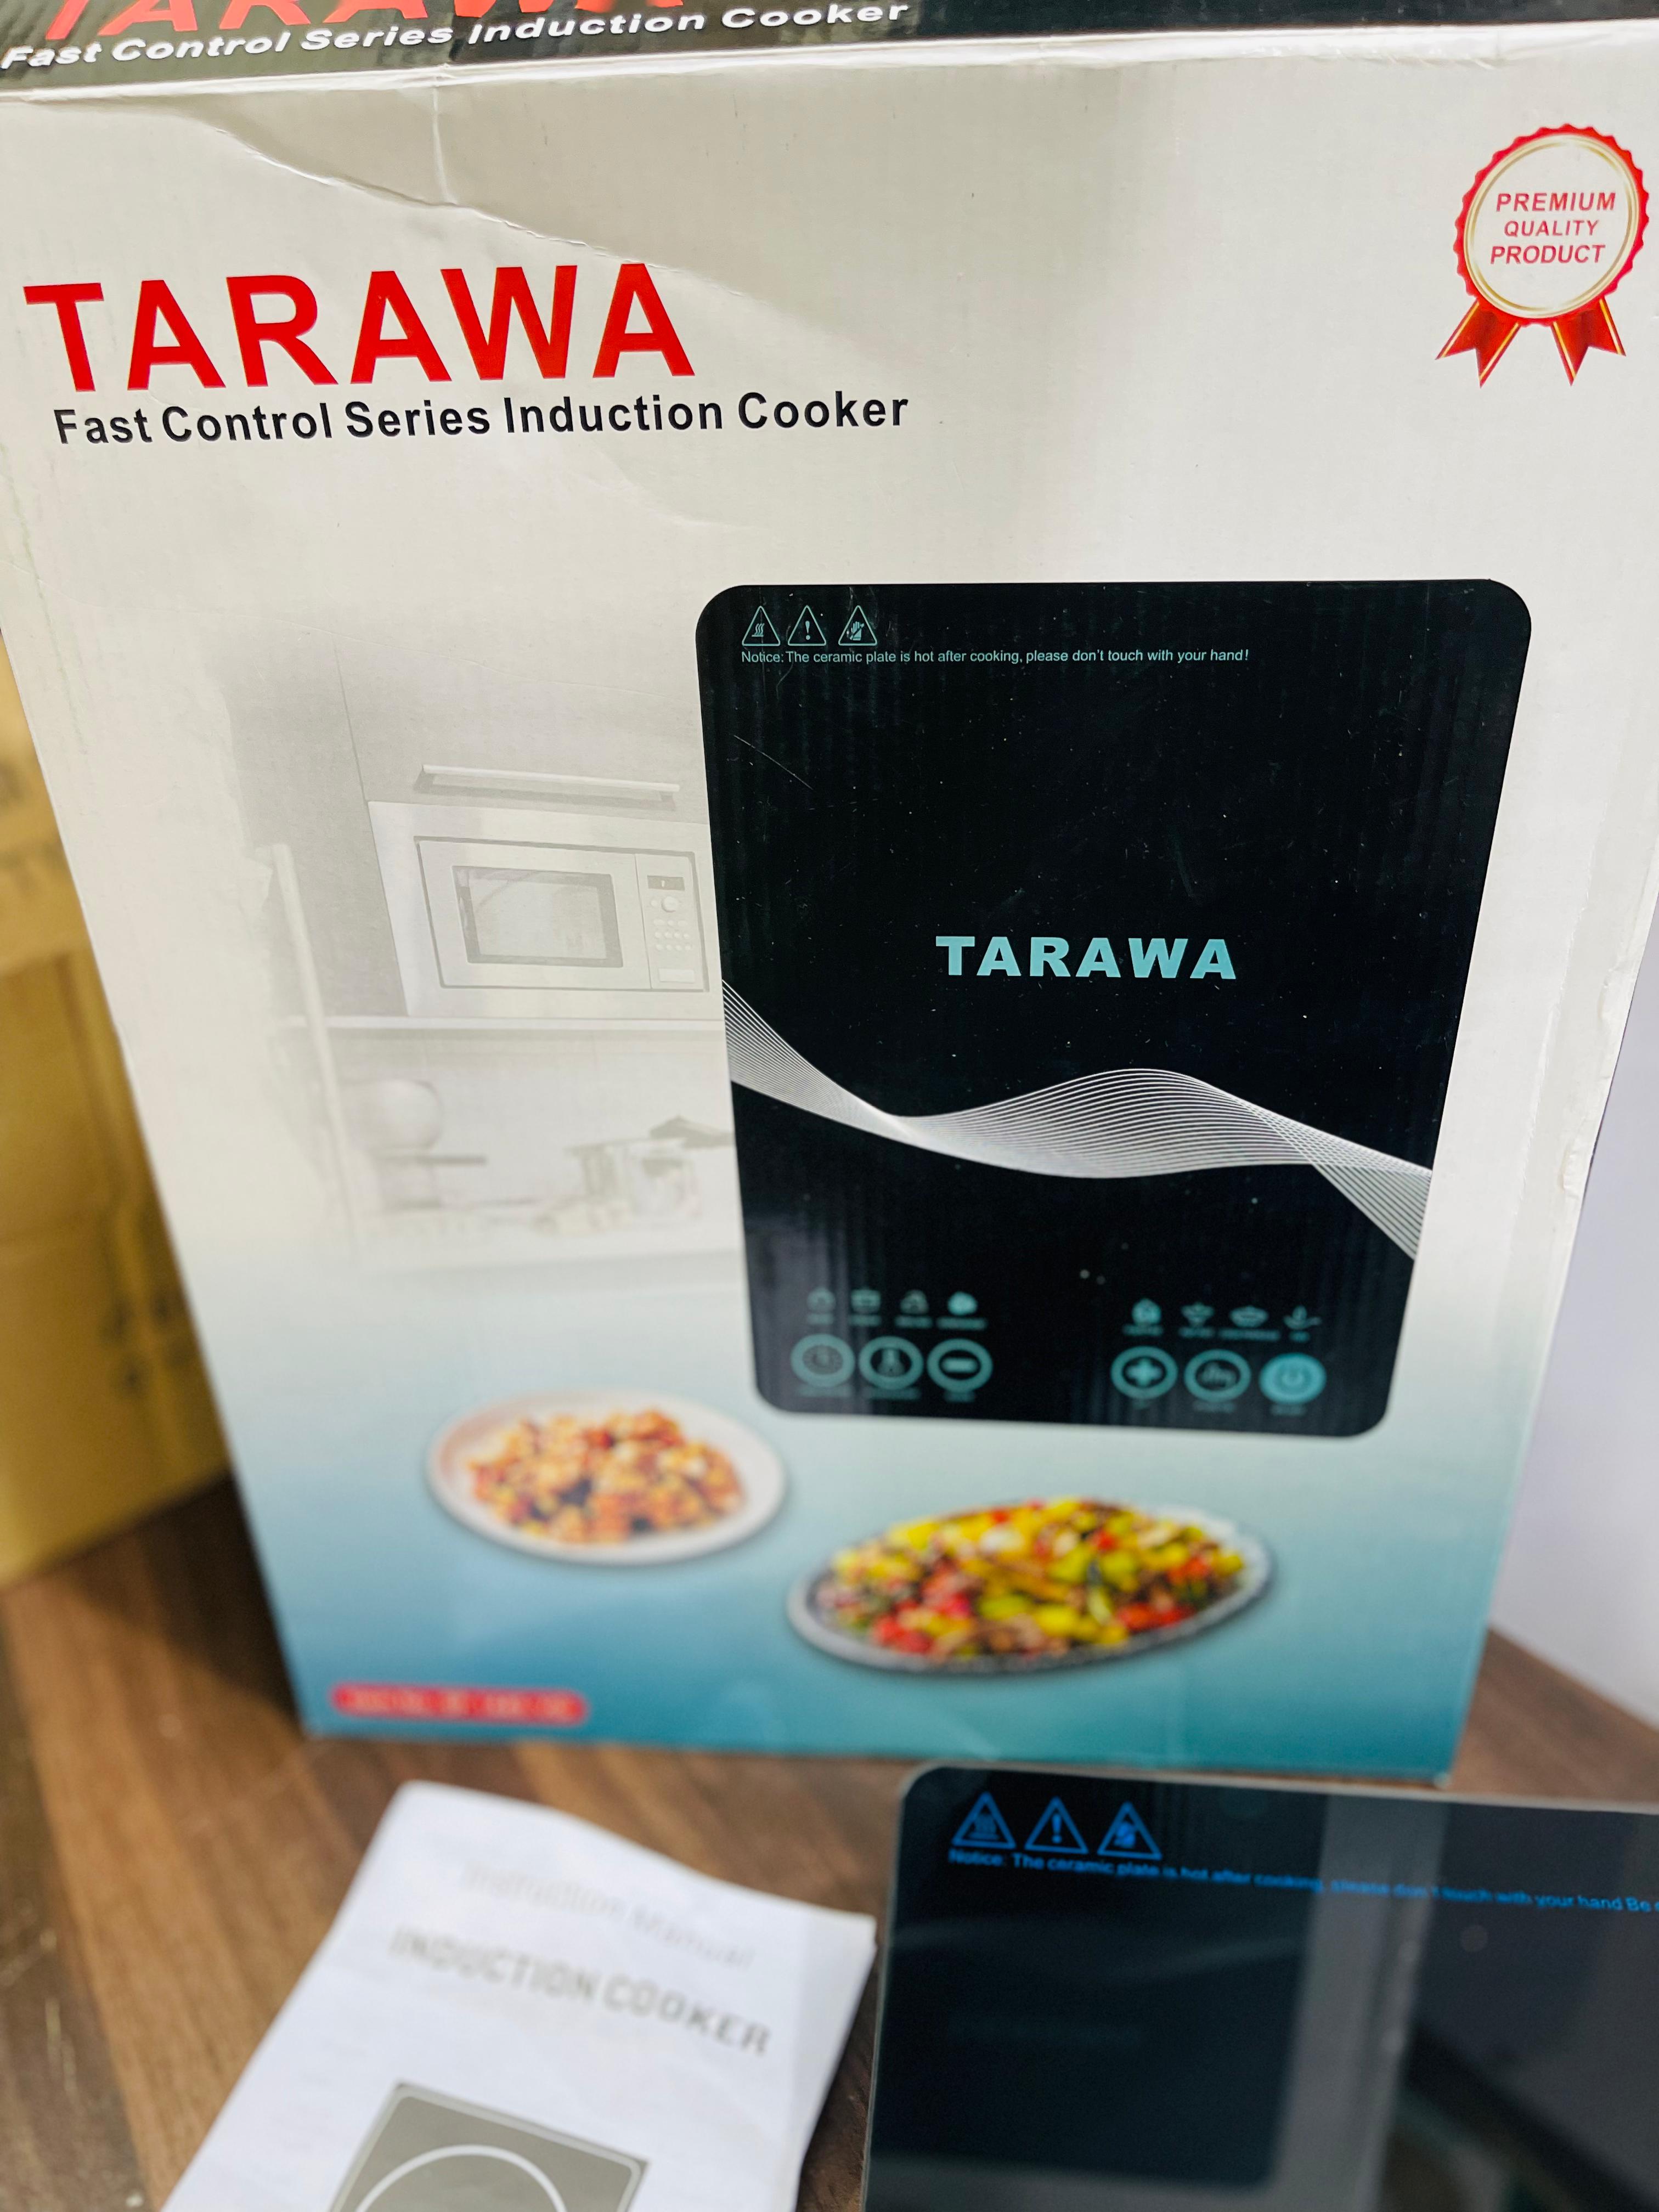 Tarawa Induction Cooker Complete Touch system